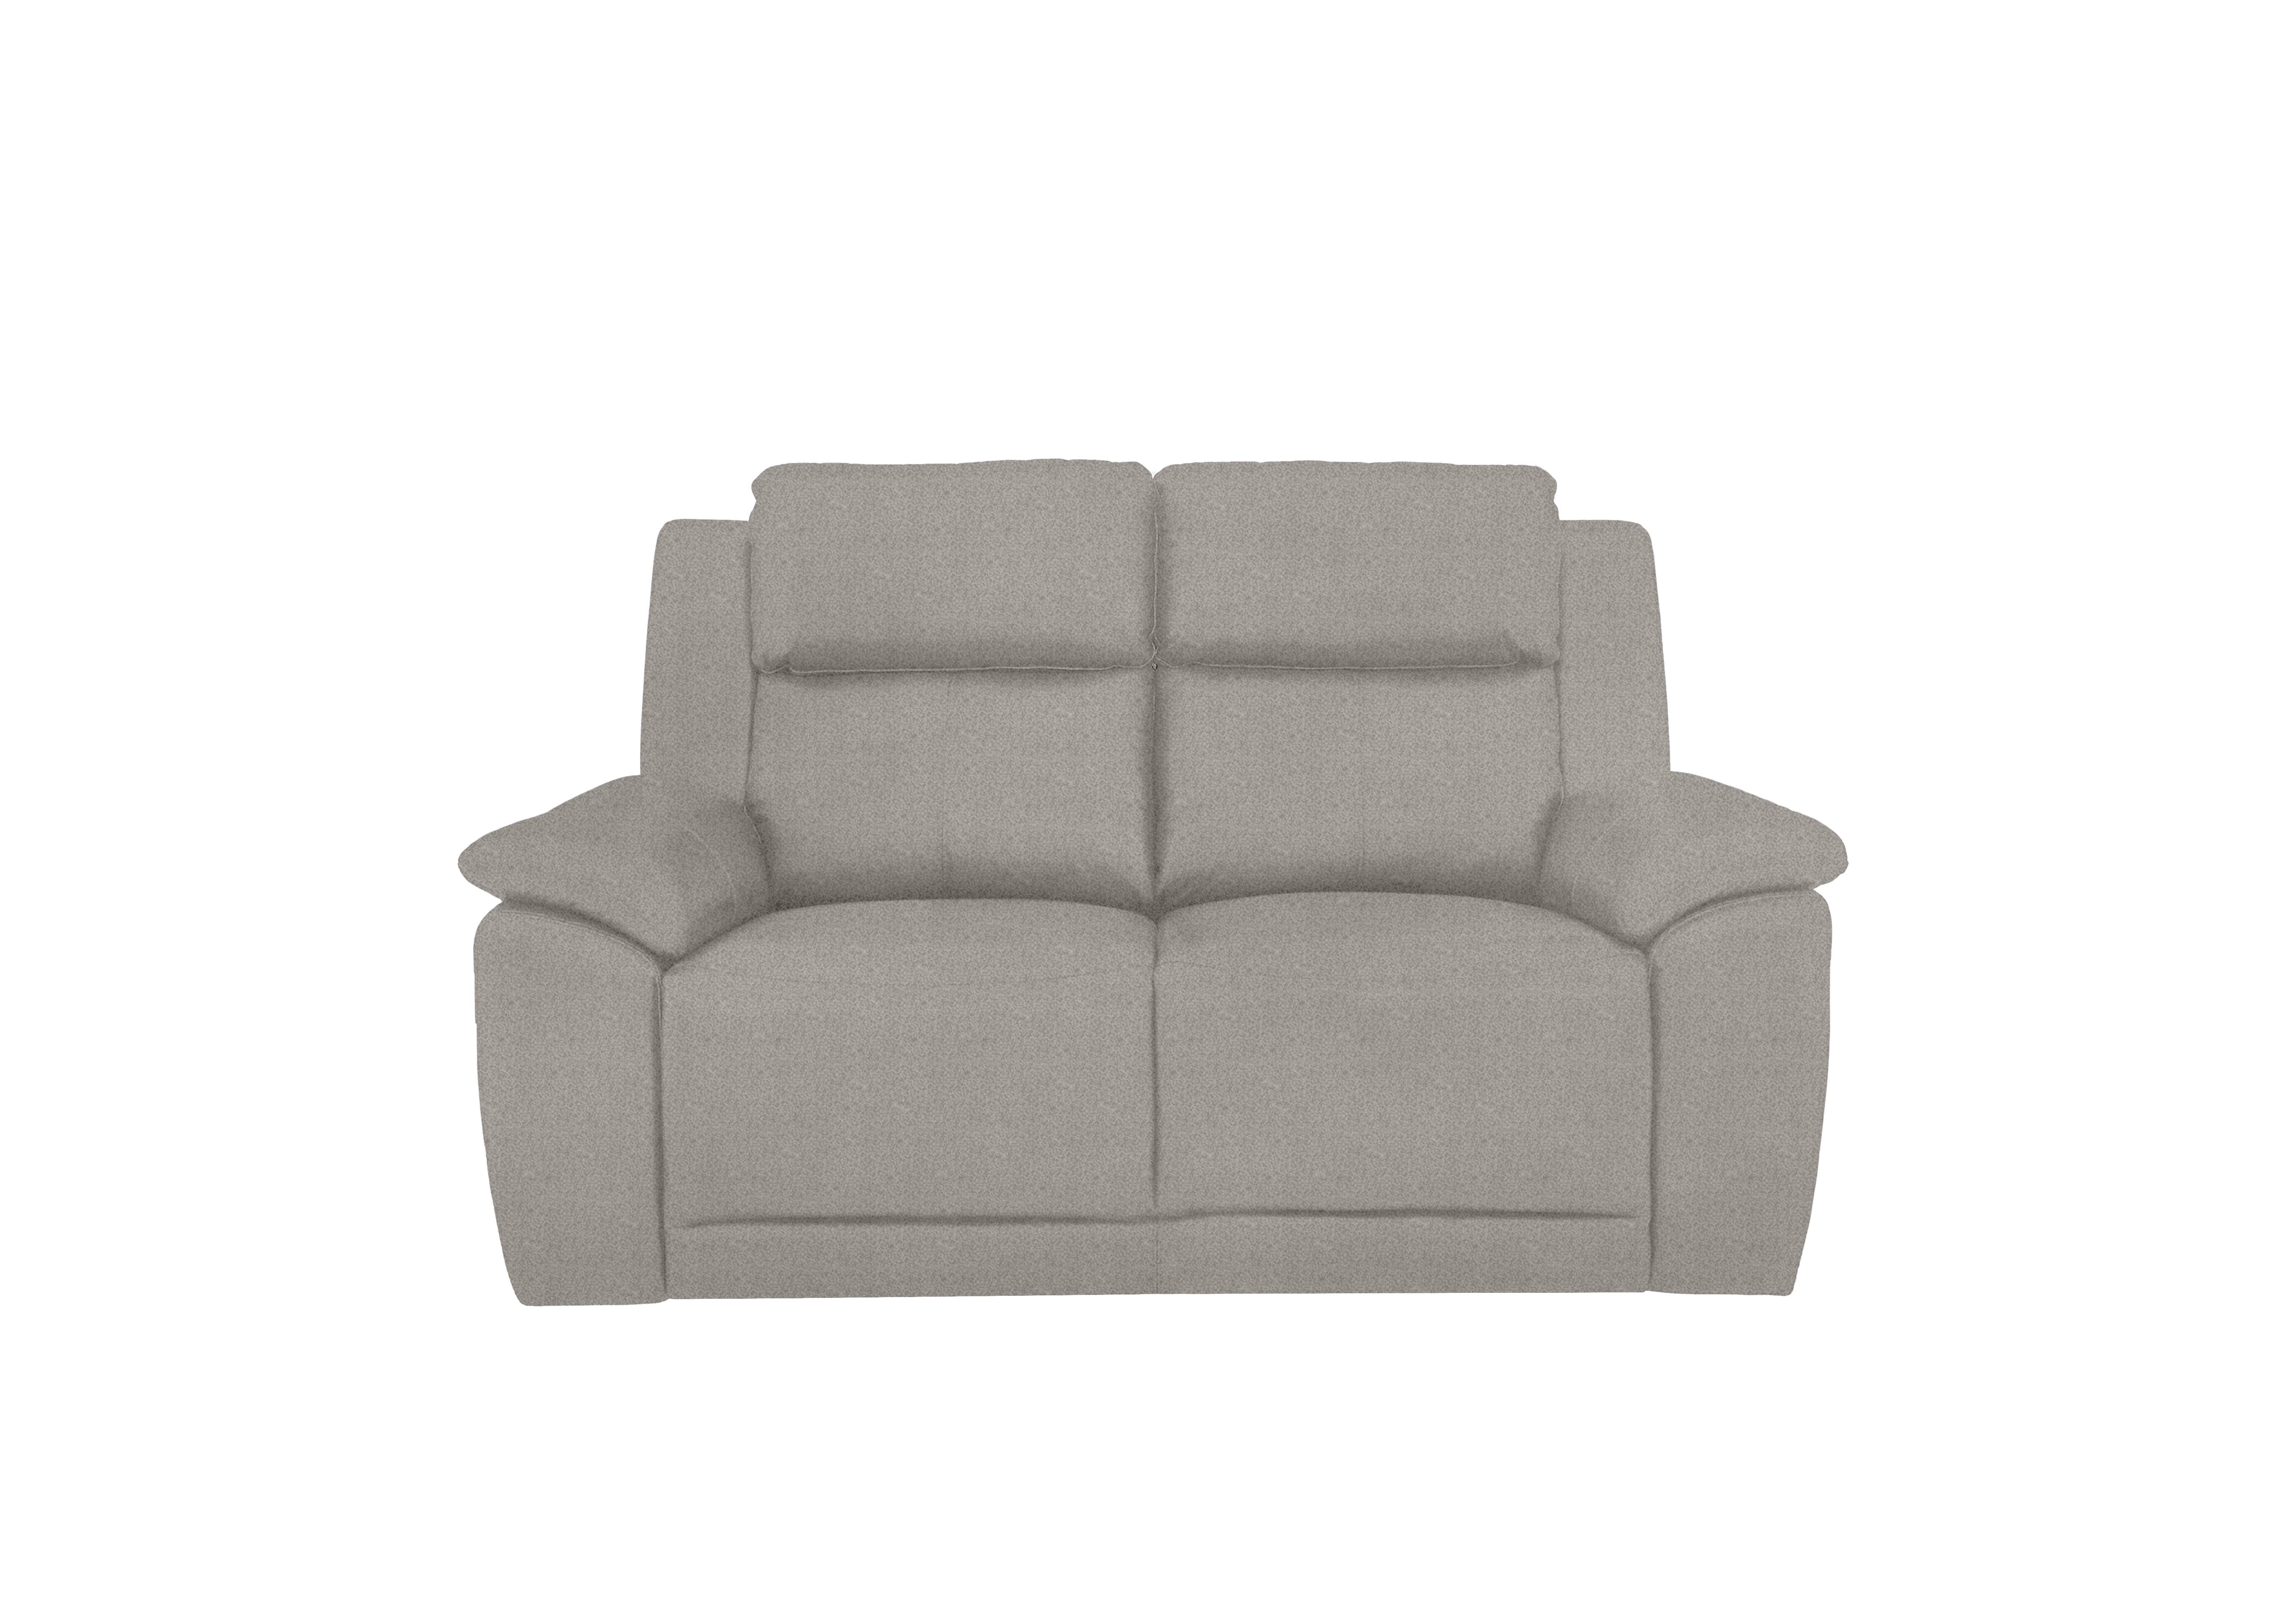 Utah 2 Seater Fabric Sofa in Rosy Light Grey Rs-0102 on Furniture Village